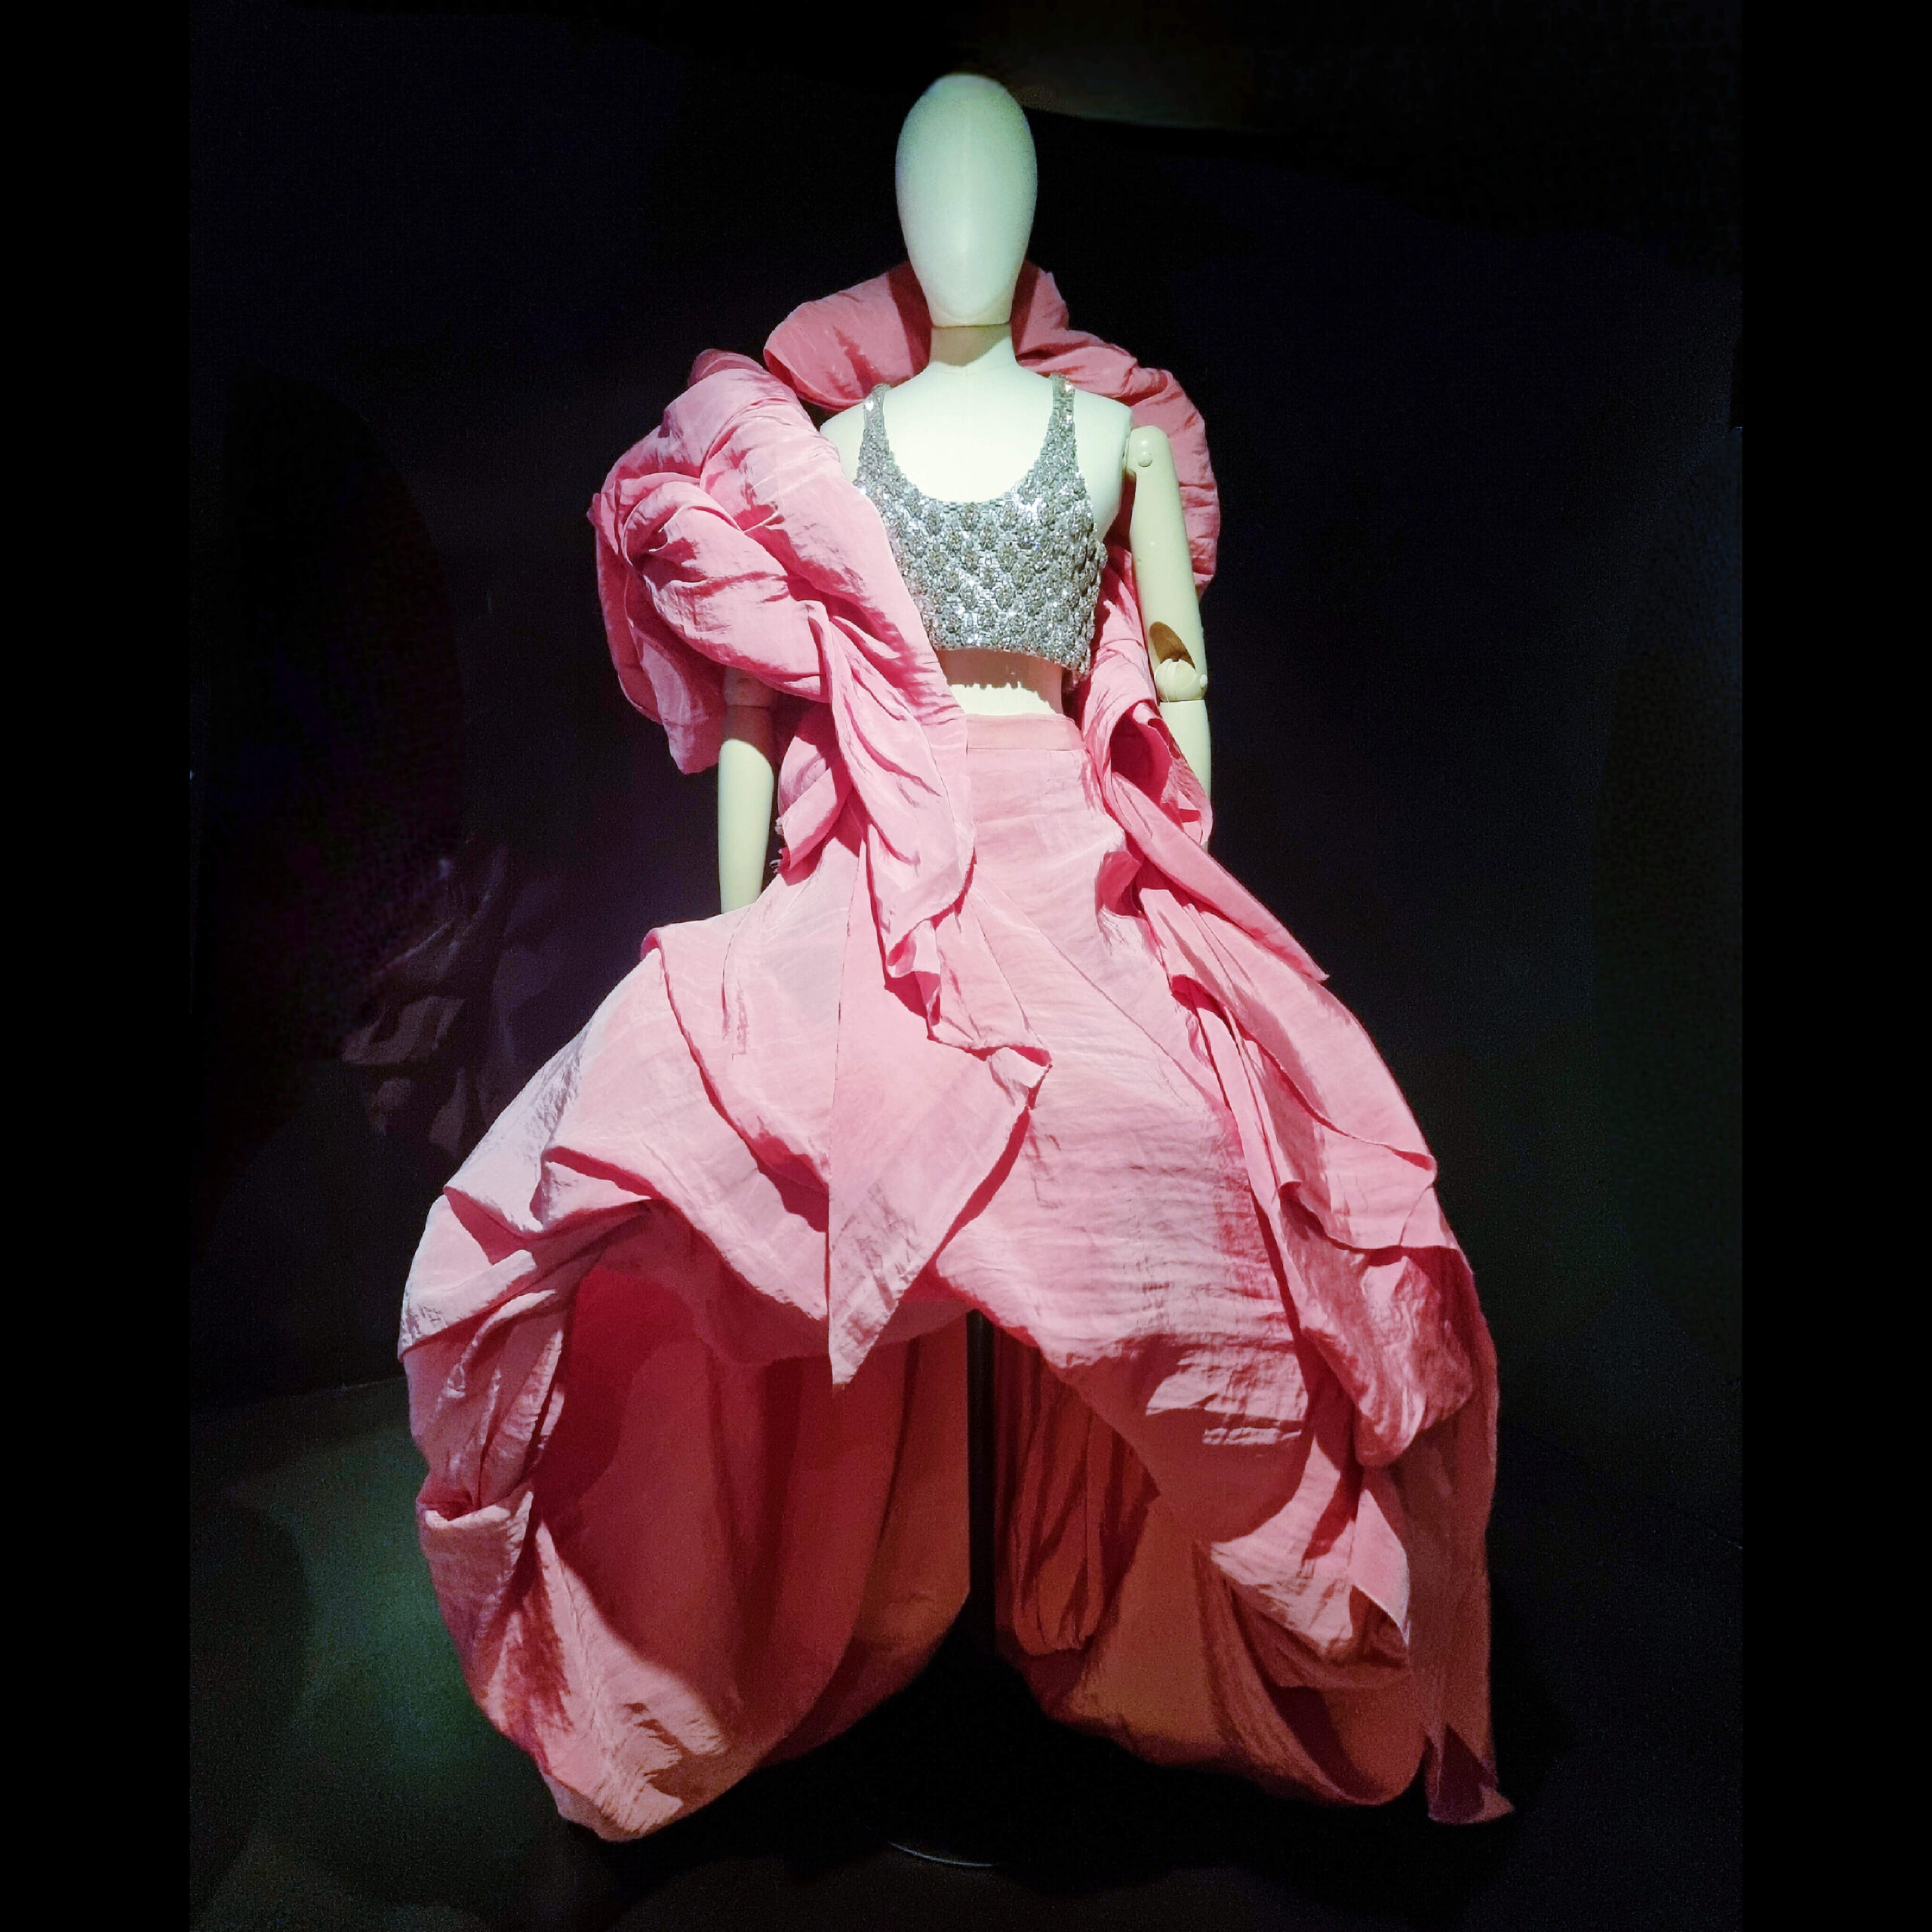 Pink & Silver Dress, Schiaparelli by Roseberry, Haute Couture, Spring-Summer, 2021.